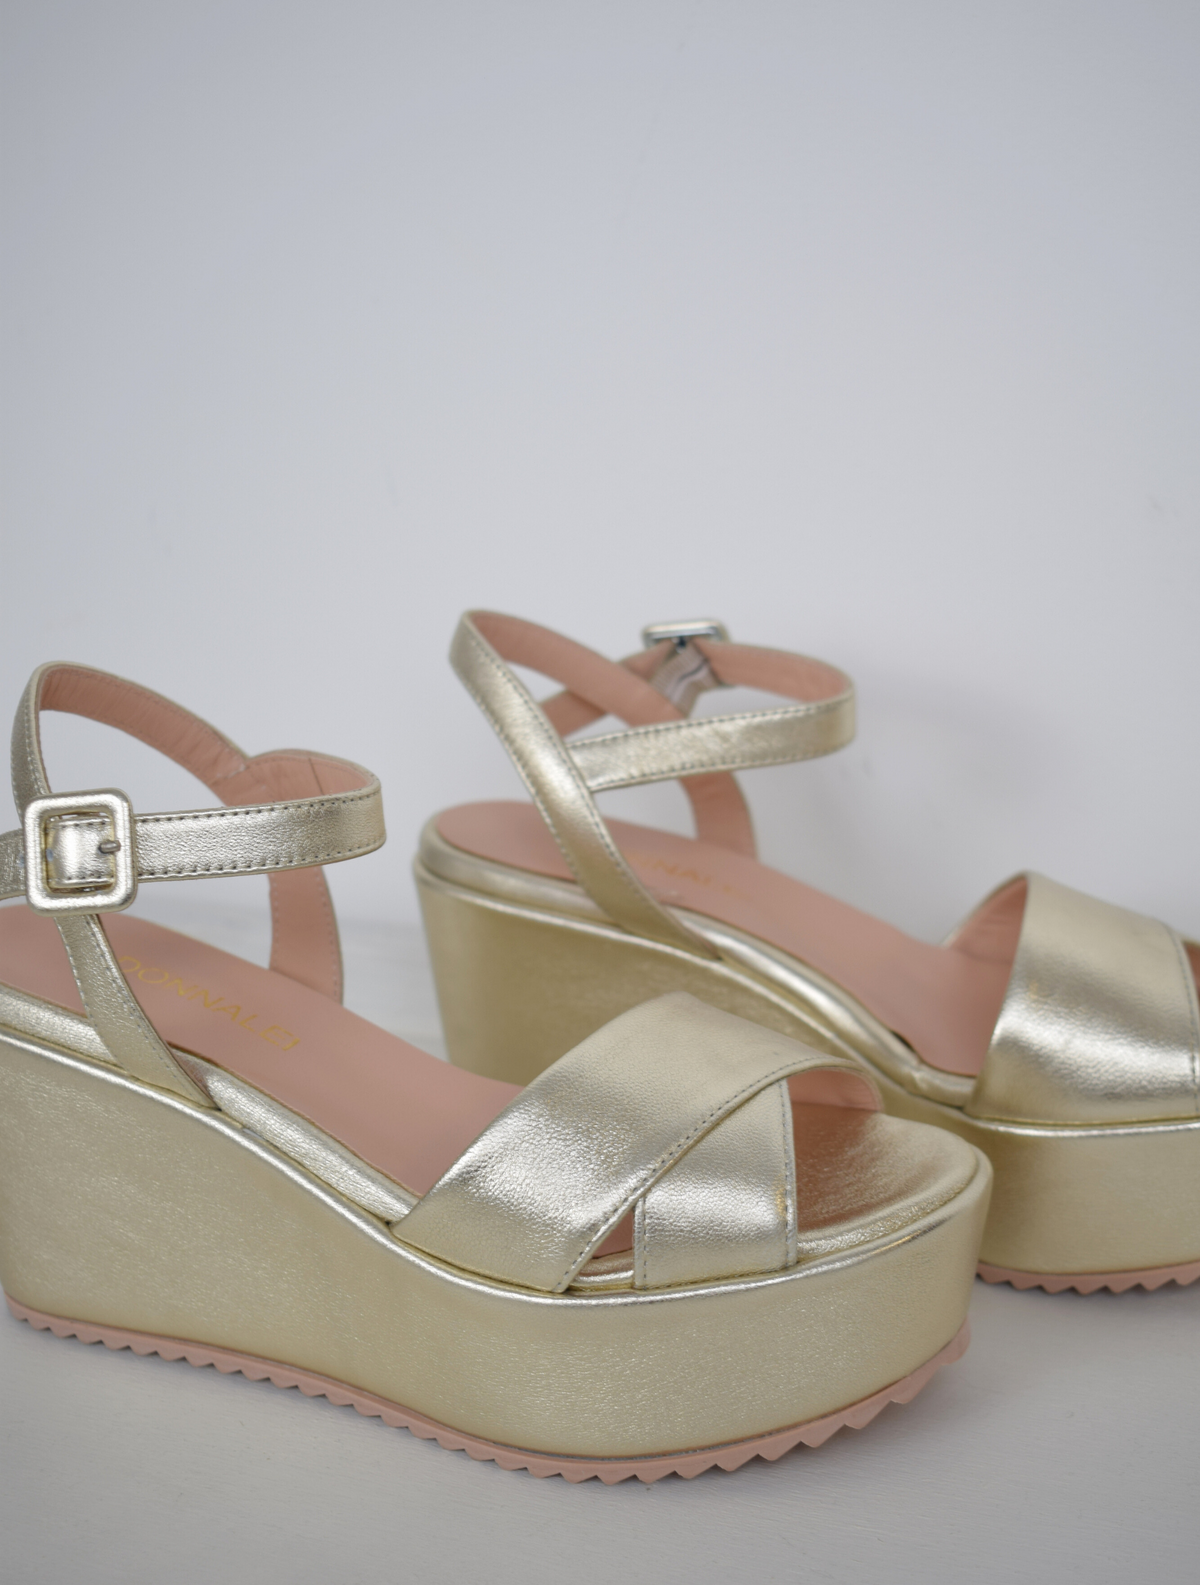 A flat gold sandal with large platform and ankle strap 